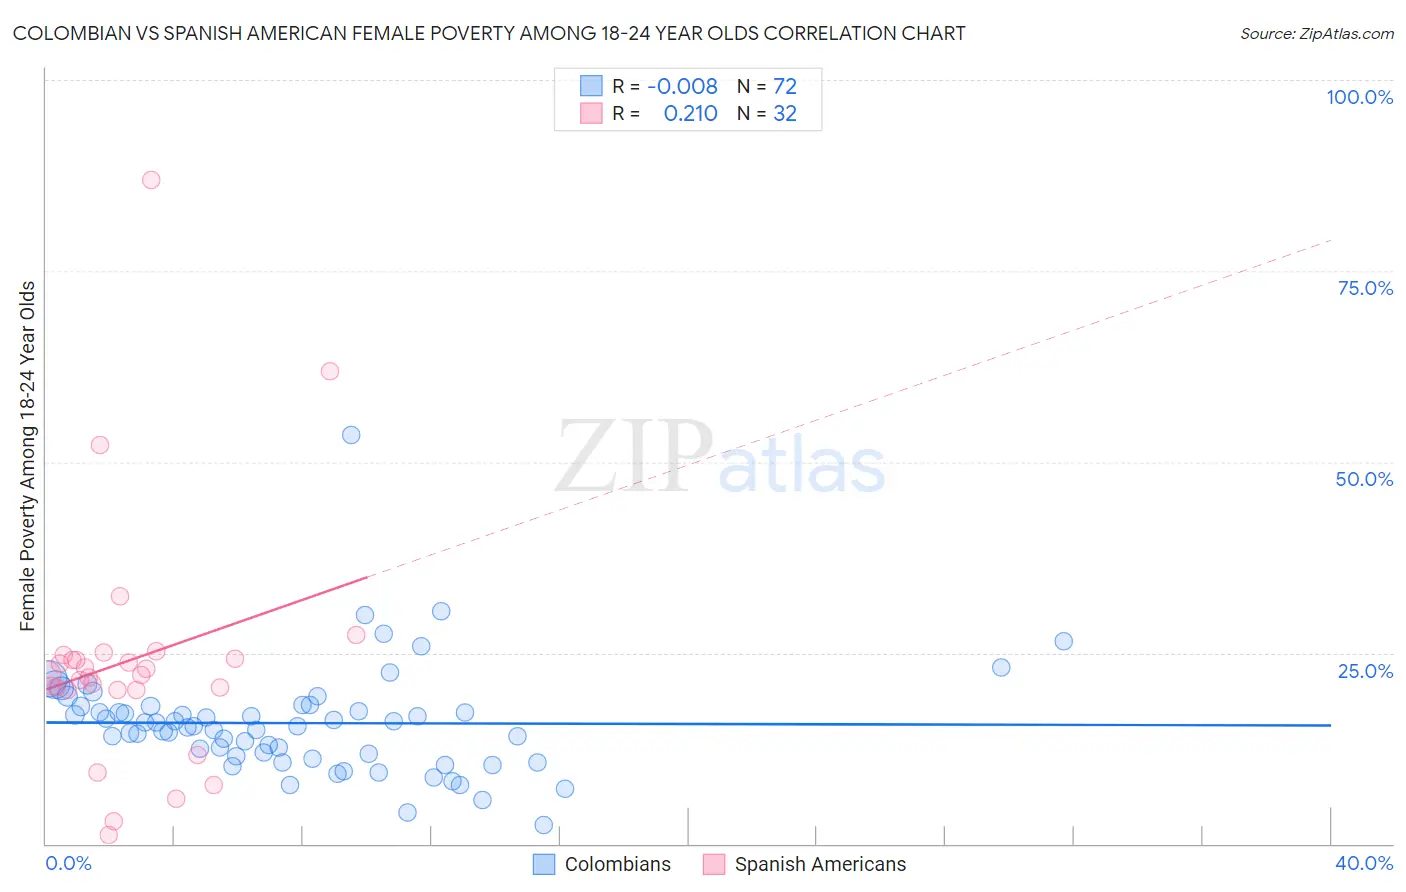 Colombian vs Spanish American Female Poverty Among 18-24 Year Olds